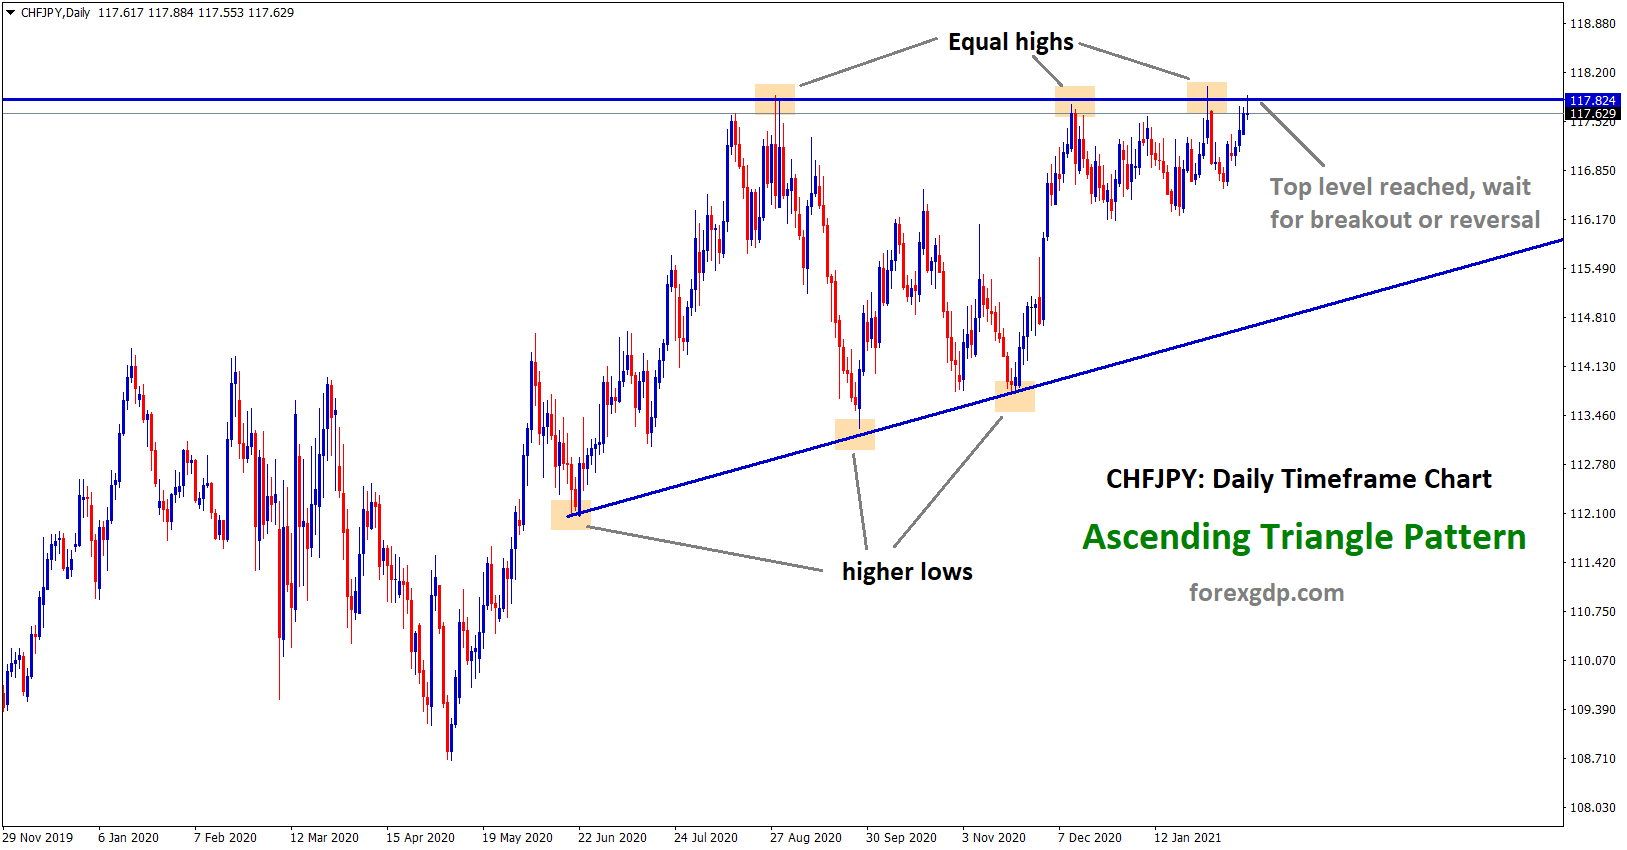 CHFJPY Ascending Triangle pattern top level reached